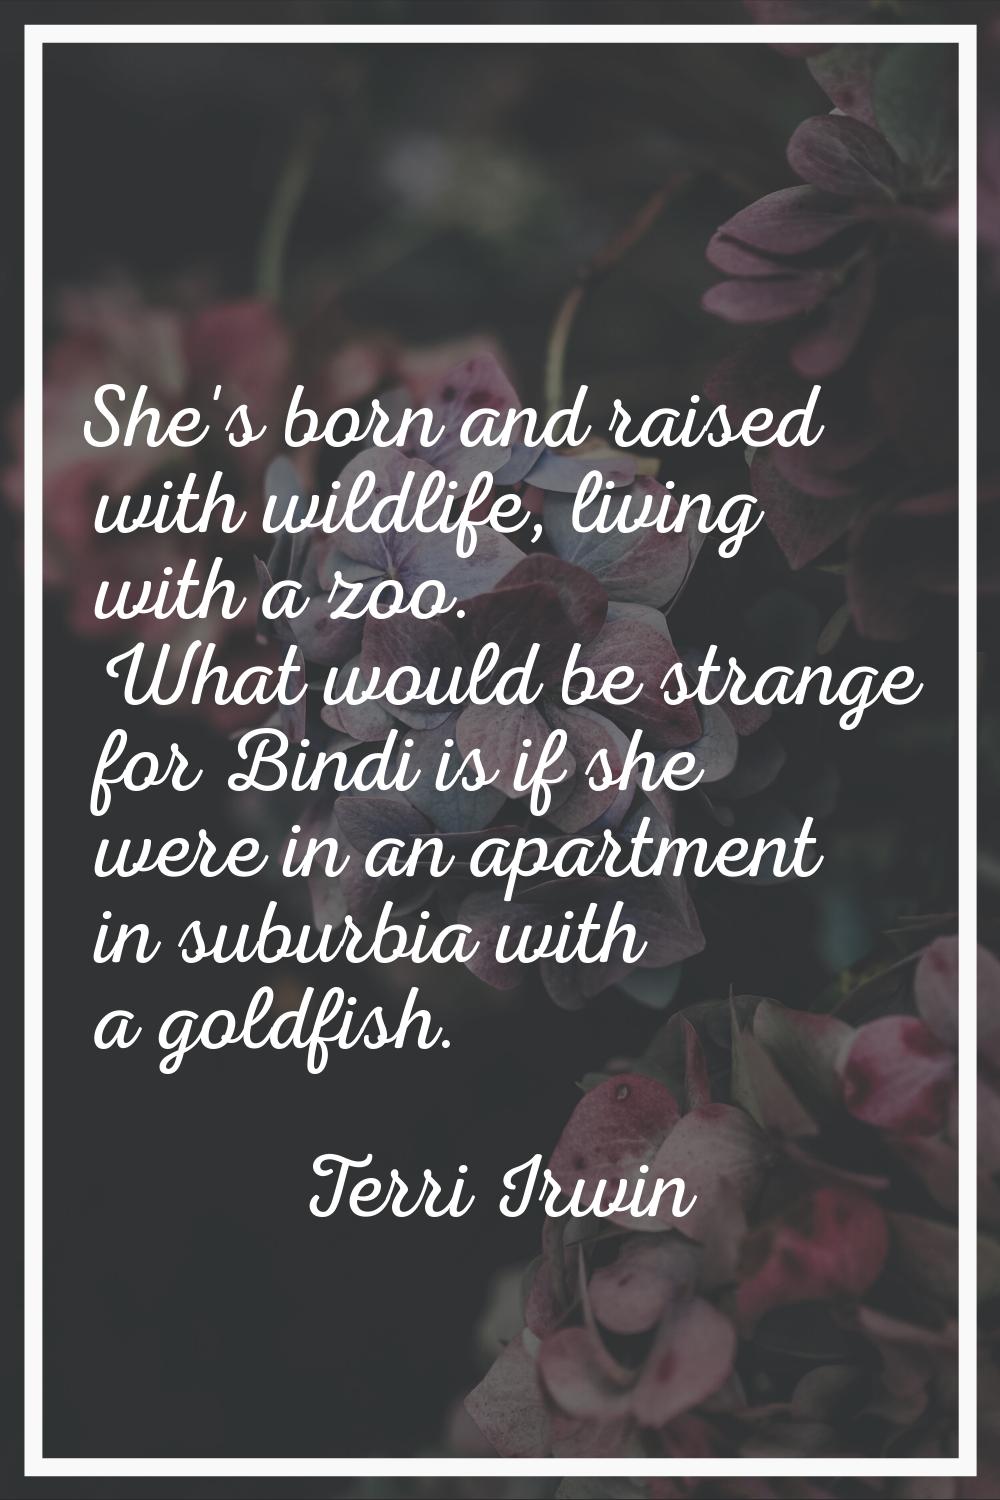 She's born and raised with wildlife, living with a zoo. What would be strange for Bindi is if she w